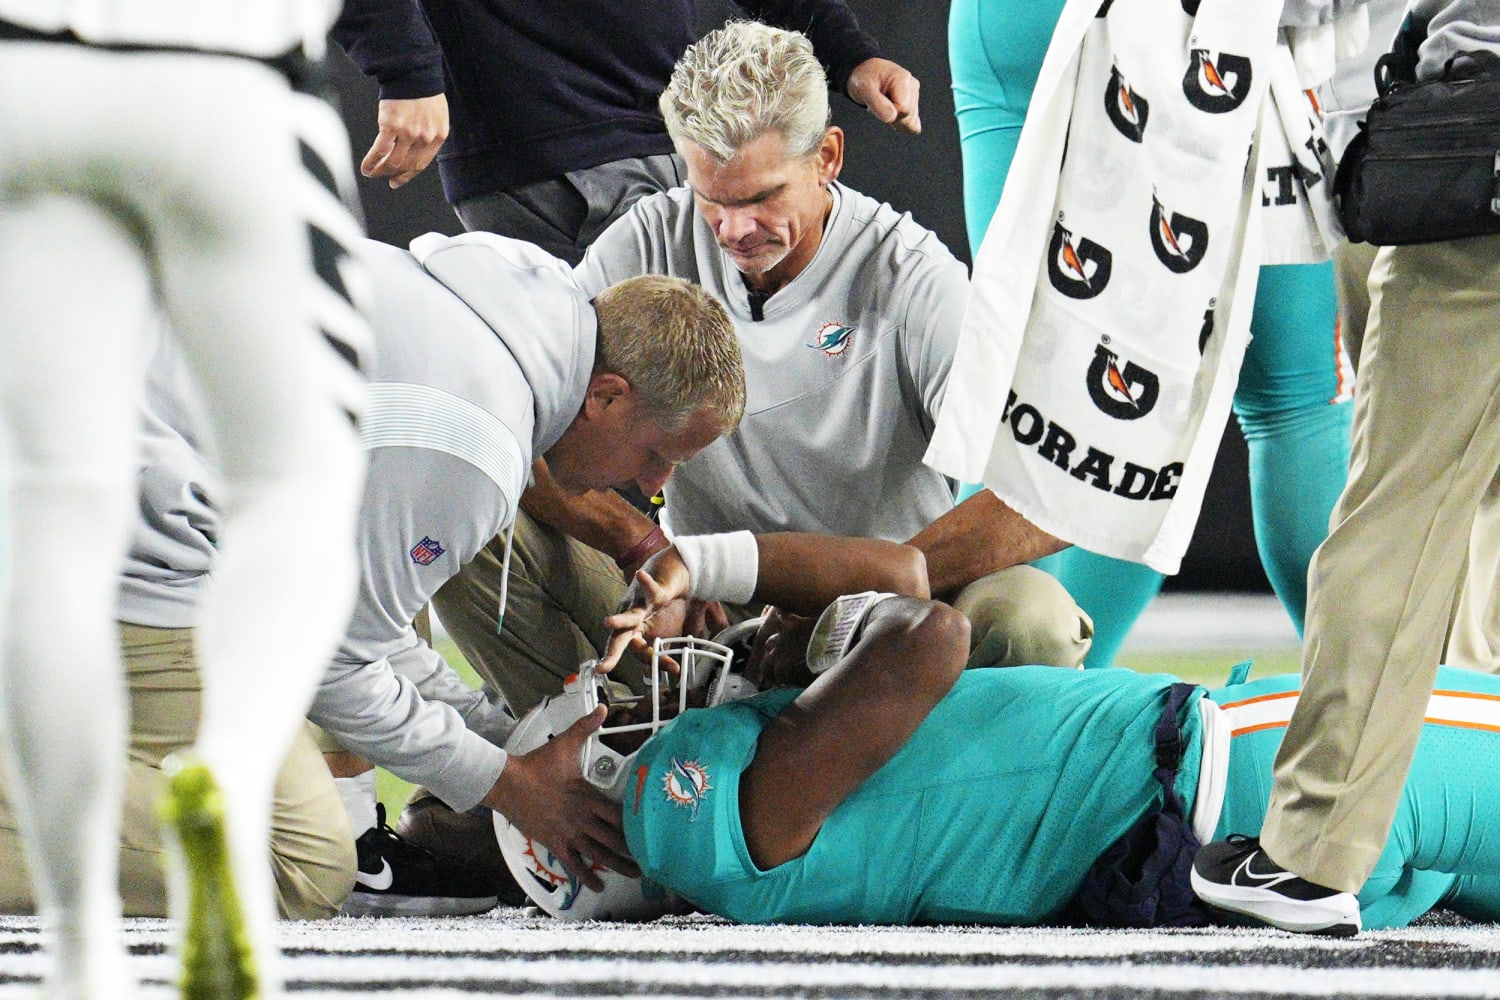 Consultant who cleared Dolphins' Tagovailoa to play after head blow is fired